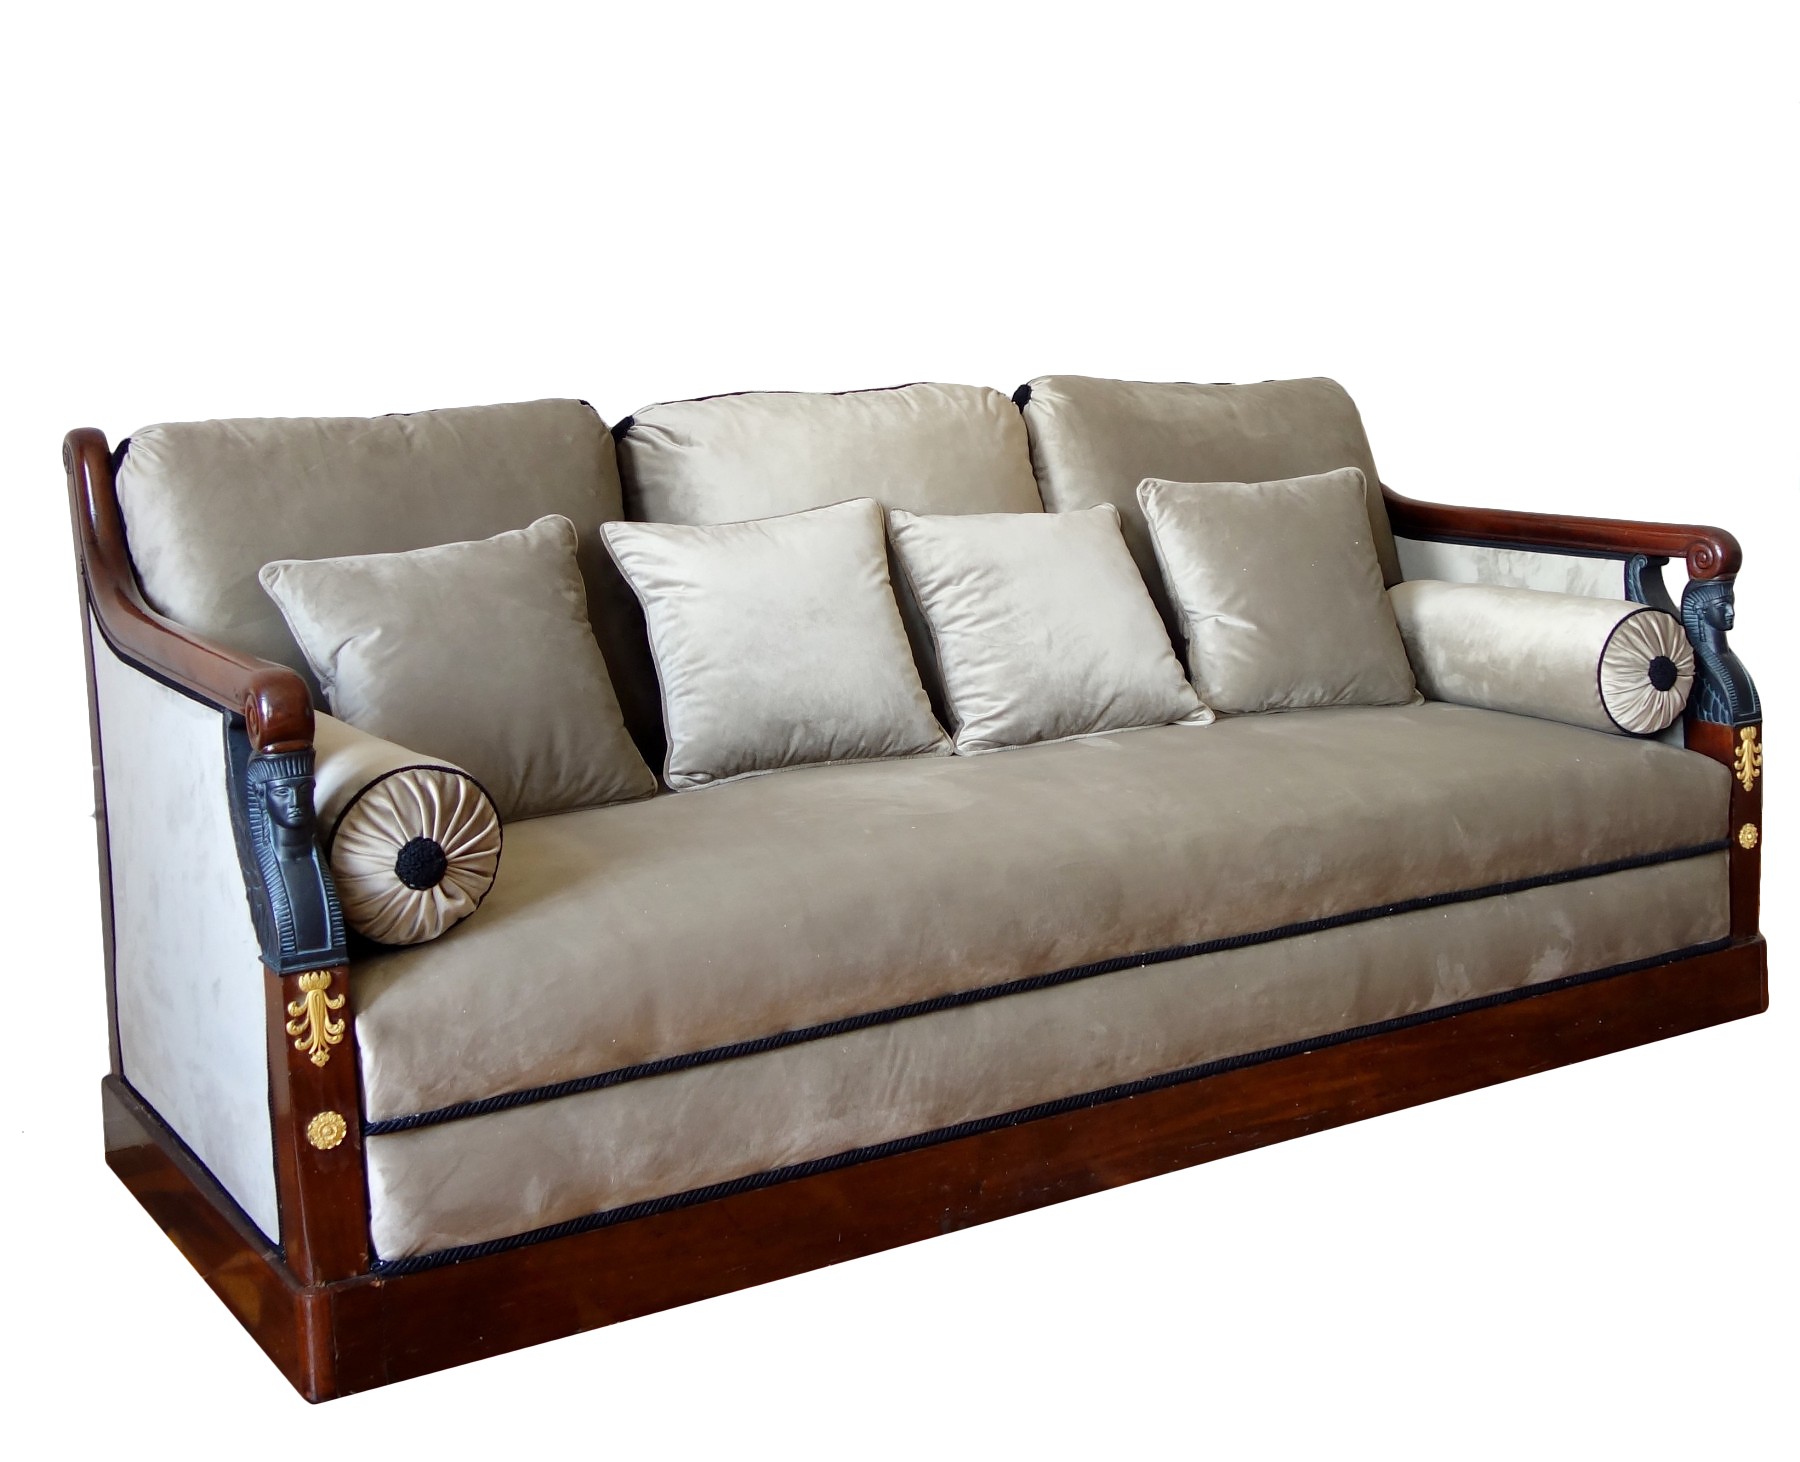 Turkish Style Sofa From The Empire